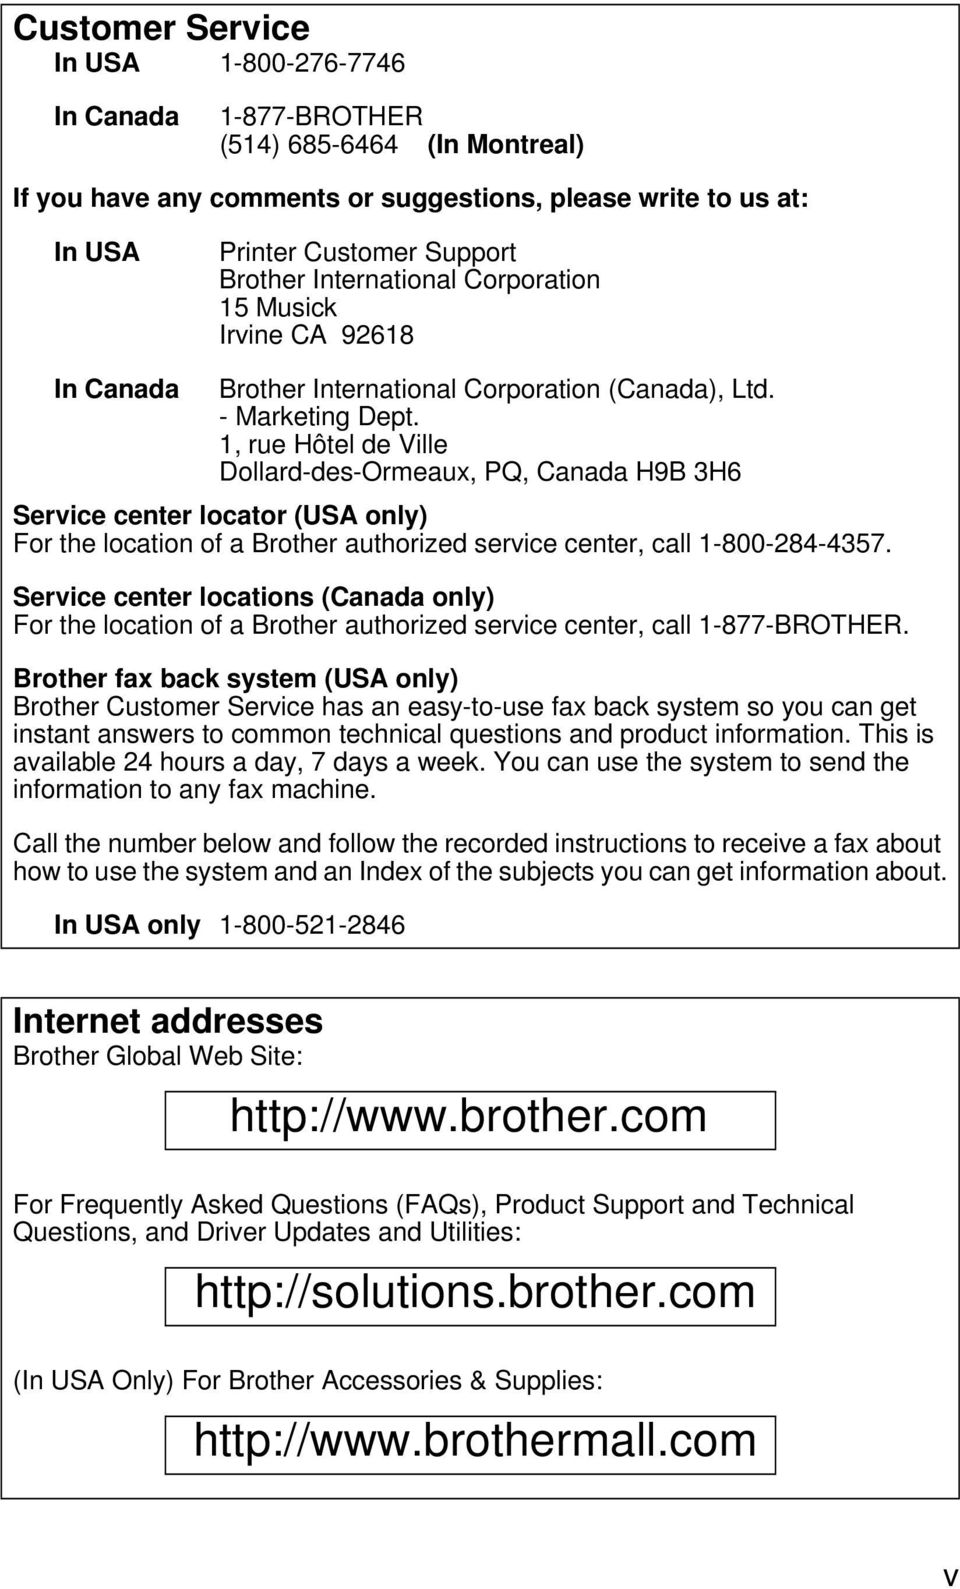 1, rue Hôtel de Ville Dollard-des-Ormeaux, PQ, Canada H9B 3H6 Service center locator (USA only) For the location of a Brother authorized service center, call 1-800-284-4357.